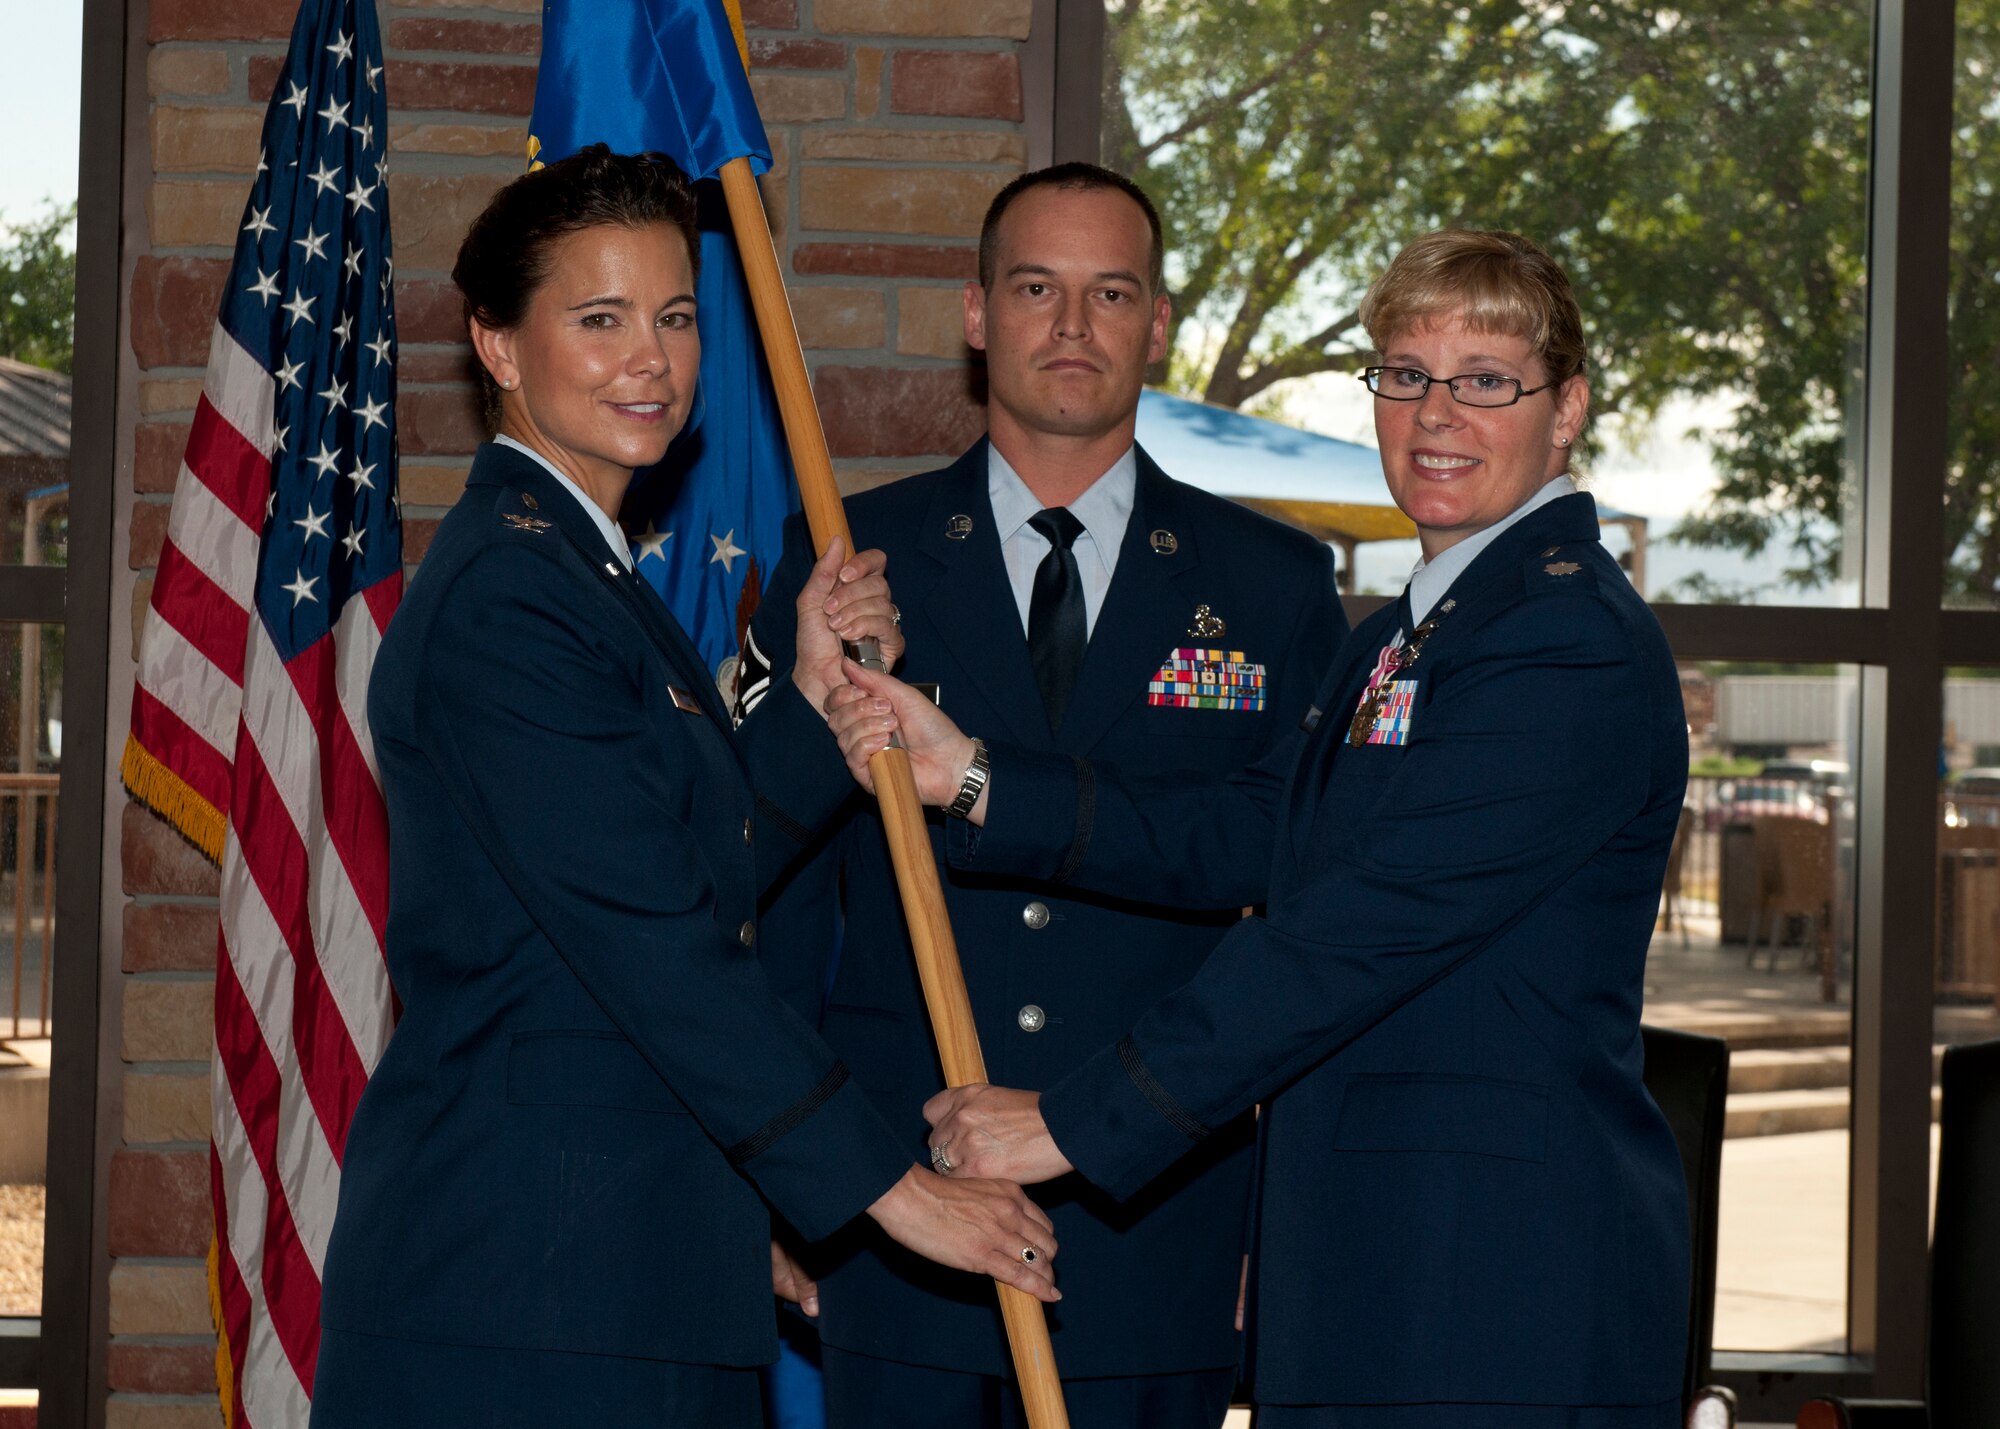 Lt. Col. Kathleen Mackey, the outgoing 49th Medical Support Squadron commander, passes the unit guidon to Col. Leslie A. Knight, the 49th Medical Group commander, during the unit’s change of command ceremony at Holloman Air Force Base, N.M., July 7, 2015. Lt. Col. Elbert Alford assumed command and will lead the 49th MDSS’s 77 active duty and civilian personnel who maintain the operation of all medical support activities, medical readiness items, facility management, and pharmacy operations. (U.S. Air Force photo by Senior Airman Chase Cannon/Released)